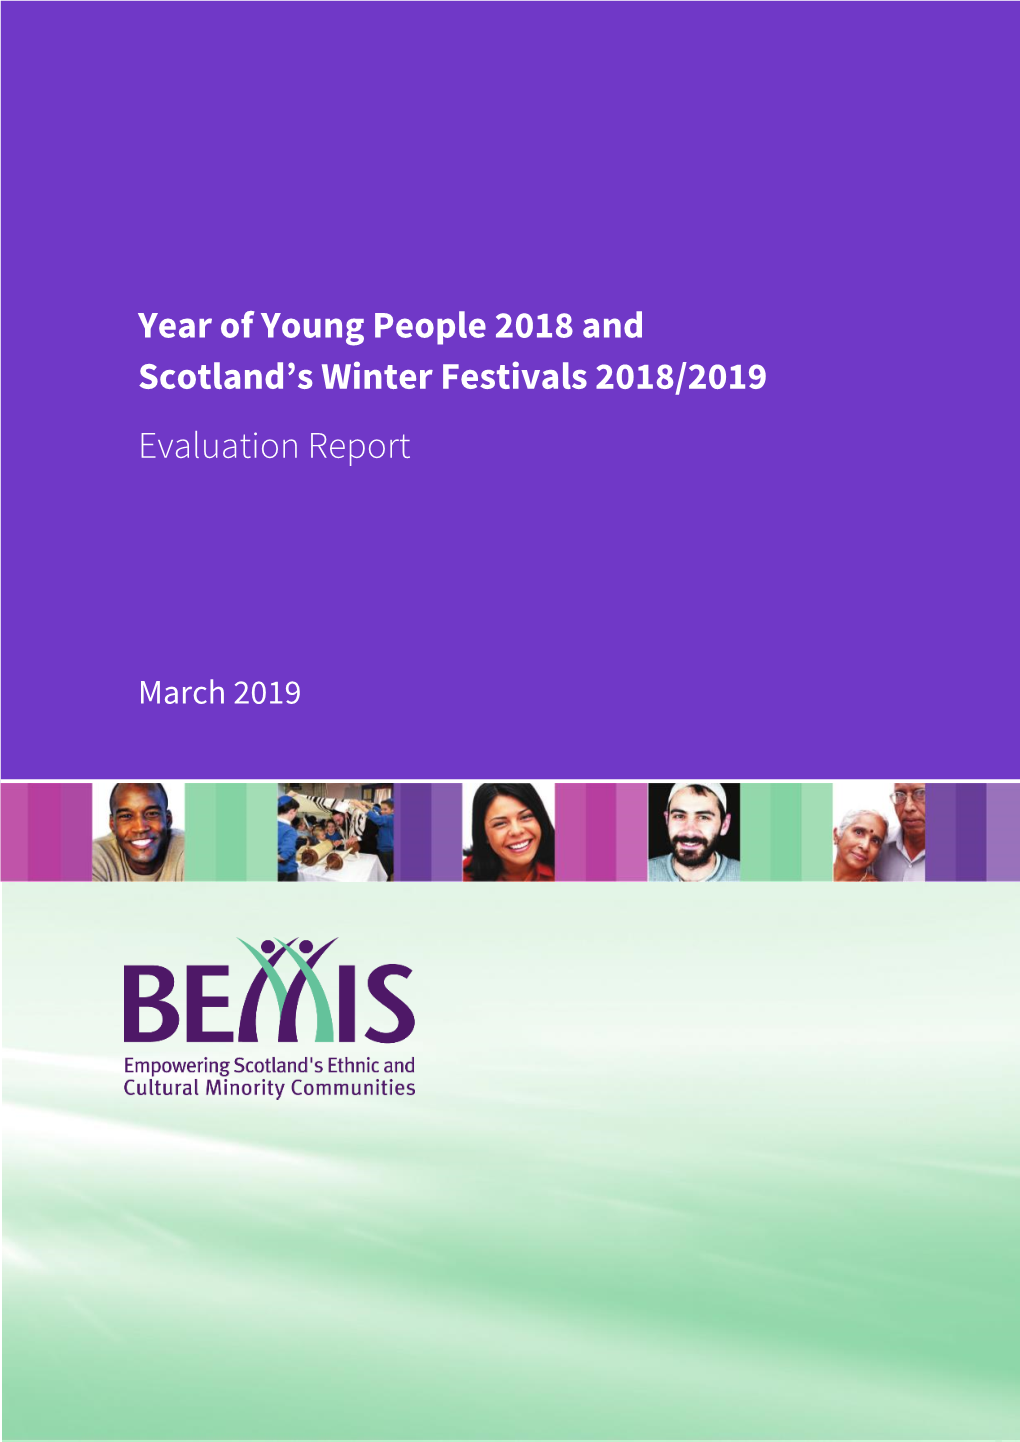 Year of Young People 2018 and Scotland's Winter Festivals 2018/2019 Evaluation Report